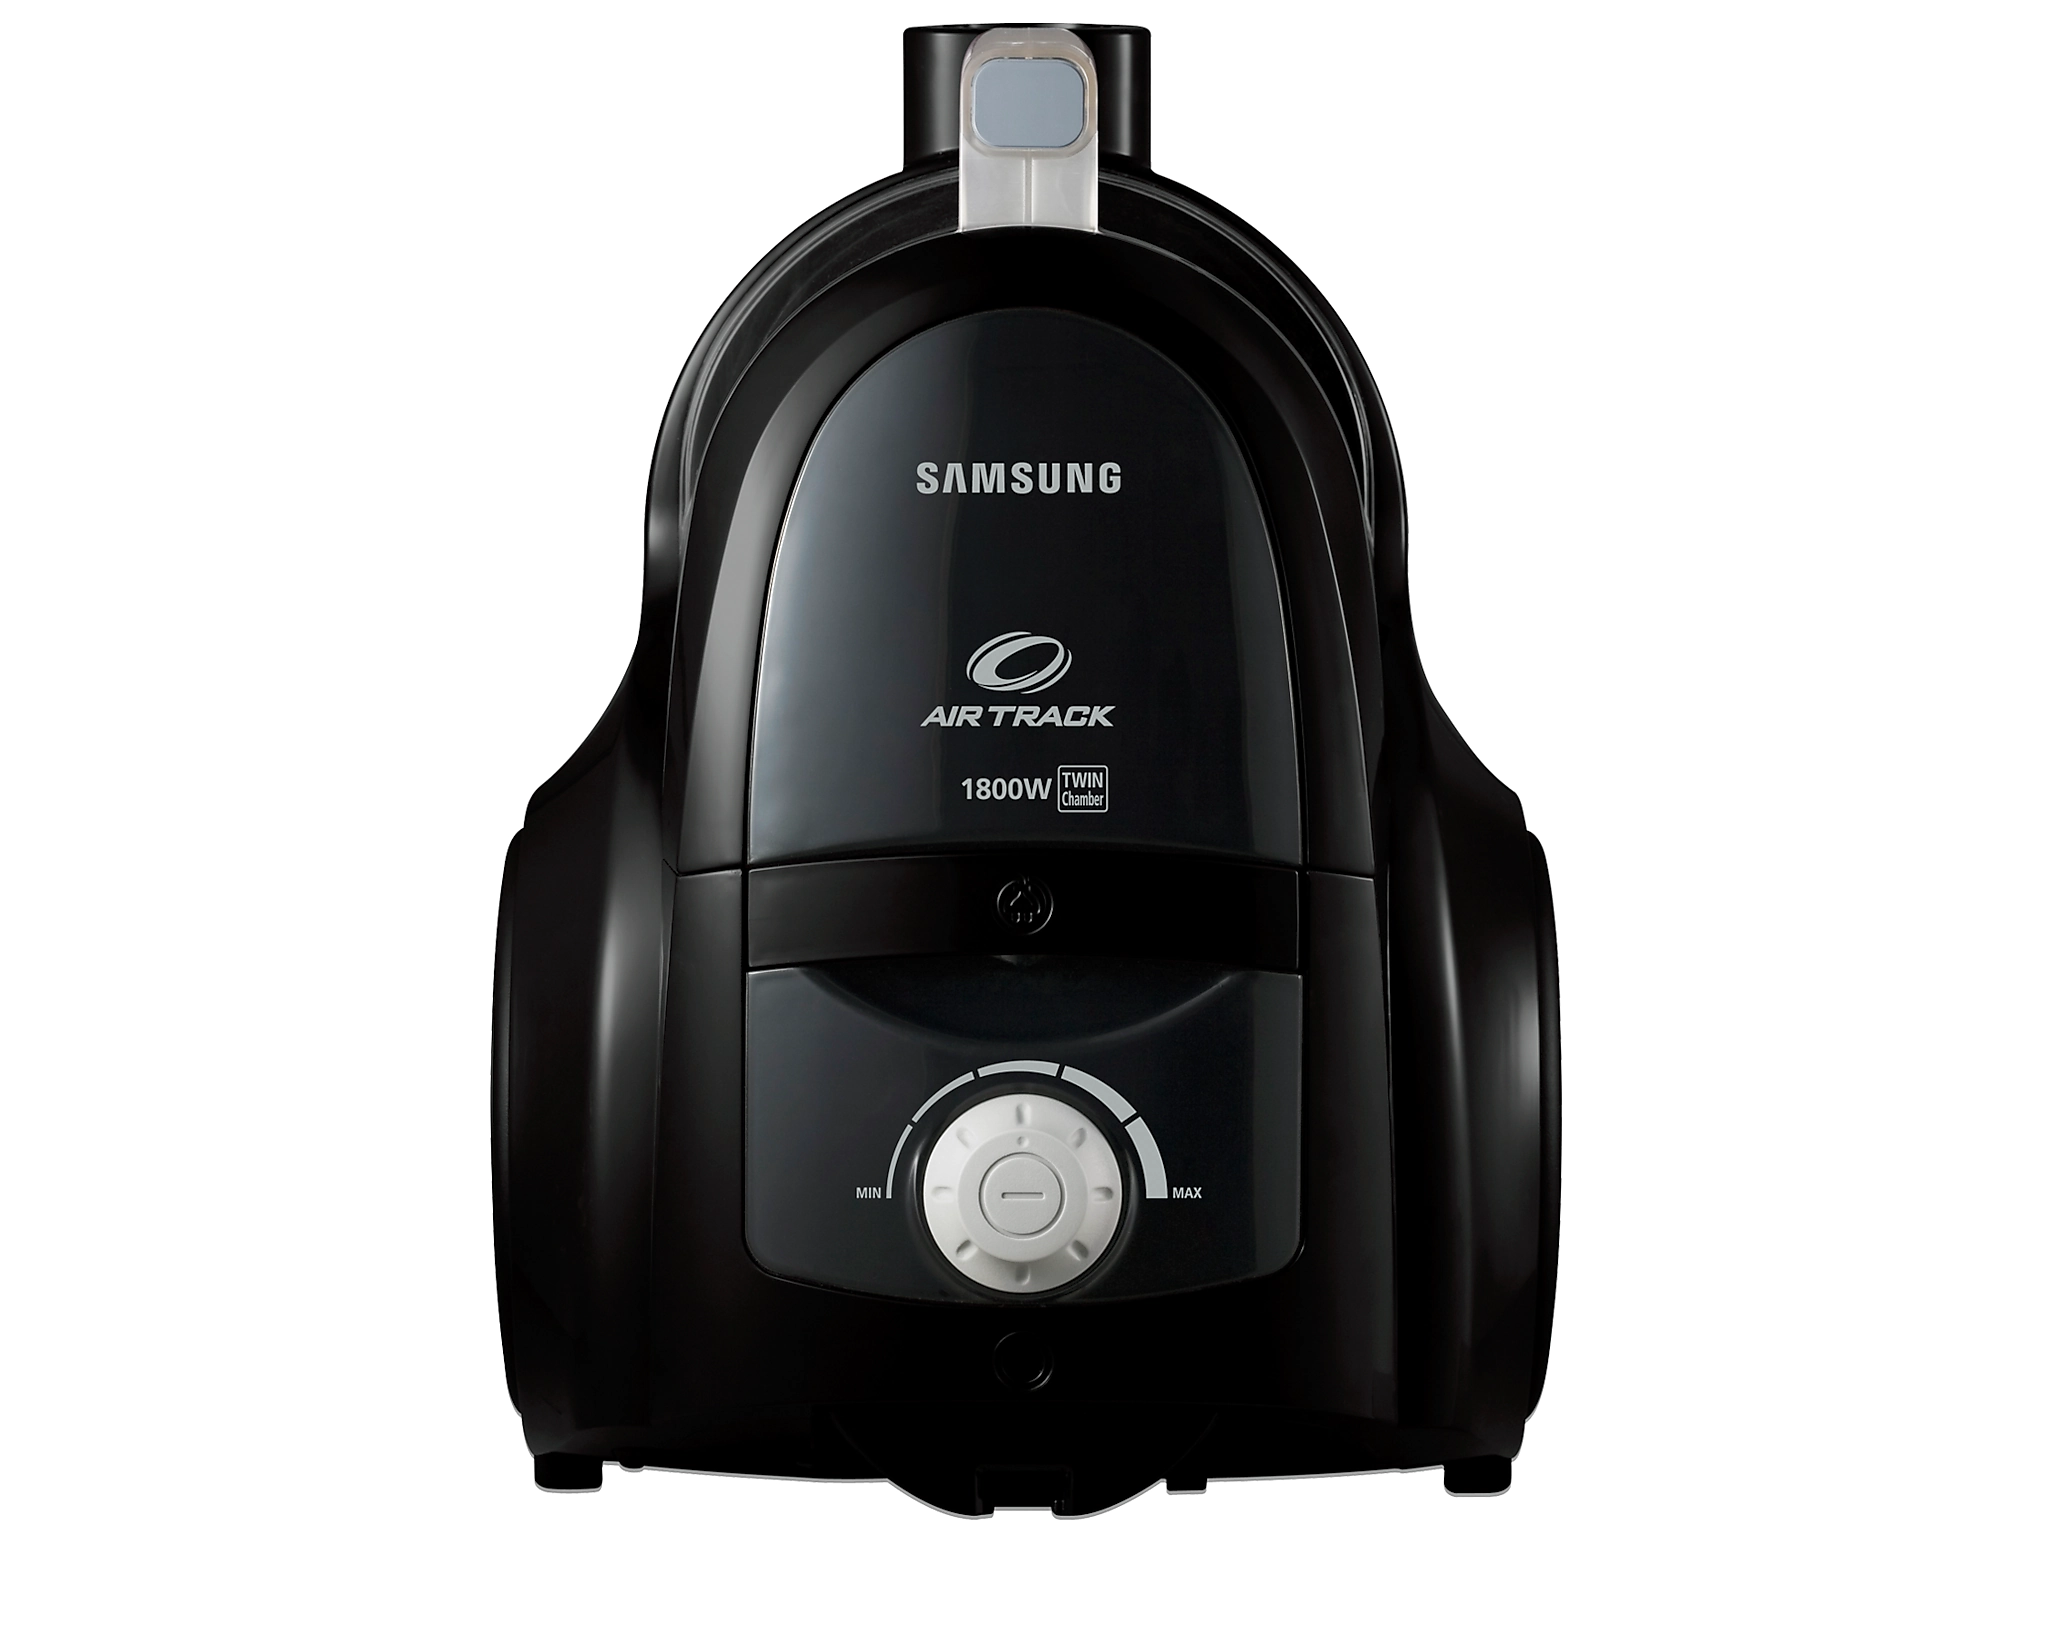 Samsung Two Chambers Vacuum Cleaner - SC4570